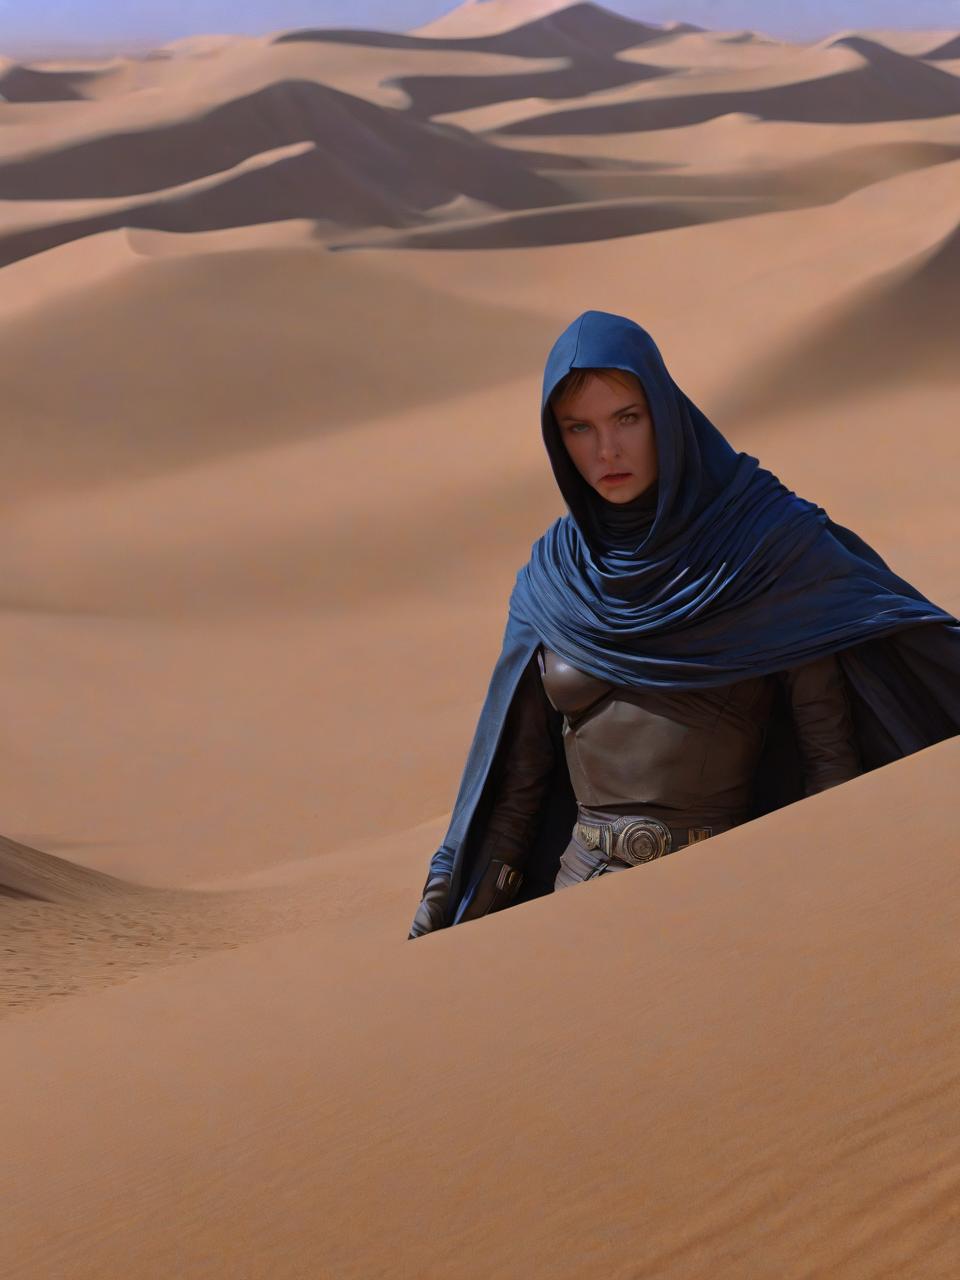  (((Dune movie))), ((((desert in background)))), ((((in hood)))), (((blue eyes))), ((Dune by Frank Herbert)), ((Epic Dune saga)), breathtaking Arrakis landscapes, immense sand dunes under a scorching sun, (majestic sandworms emerging from the desert), [advanced ornithopters in flight], [[House Atreides insignia]], [Fremen in traditional stillsuits], (mystical Bene Gesserit ensembles), (intricate Harkonnen machinery), Spice Melange visions, (otherworldly sunsets on Arrakis), (high definition desert textures), 4K cinematic quality, 8K ultra resolution detail, dynamic lighting effects, atmospheric dust and sand particles, deep shadows and stark contrasts, vibrant color grading, (detailed costume designs), (futuristic architecture and technology